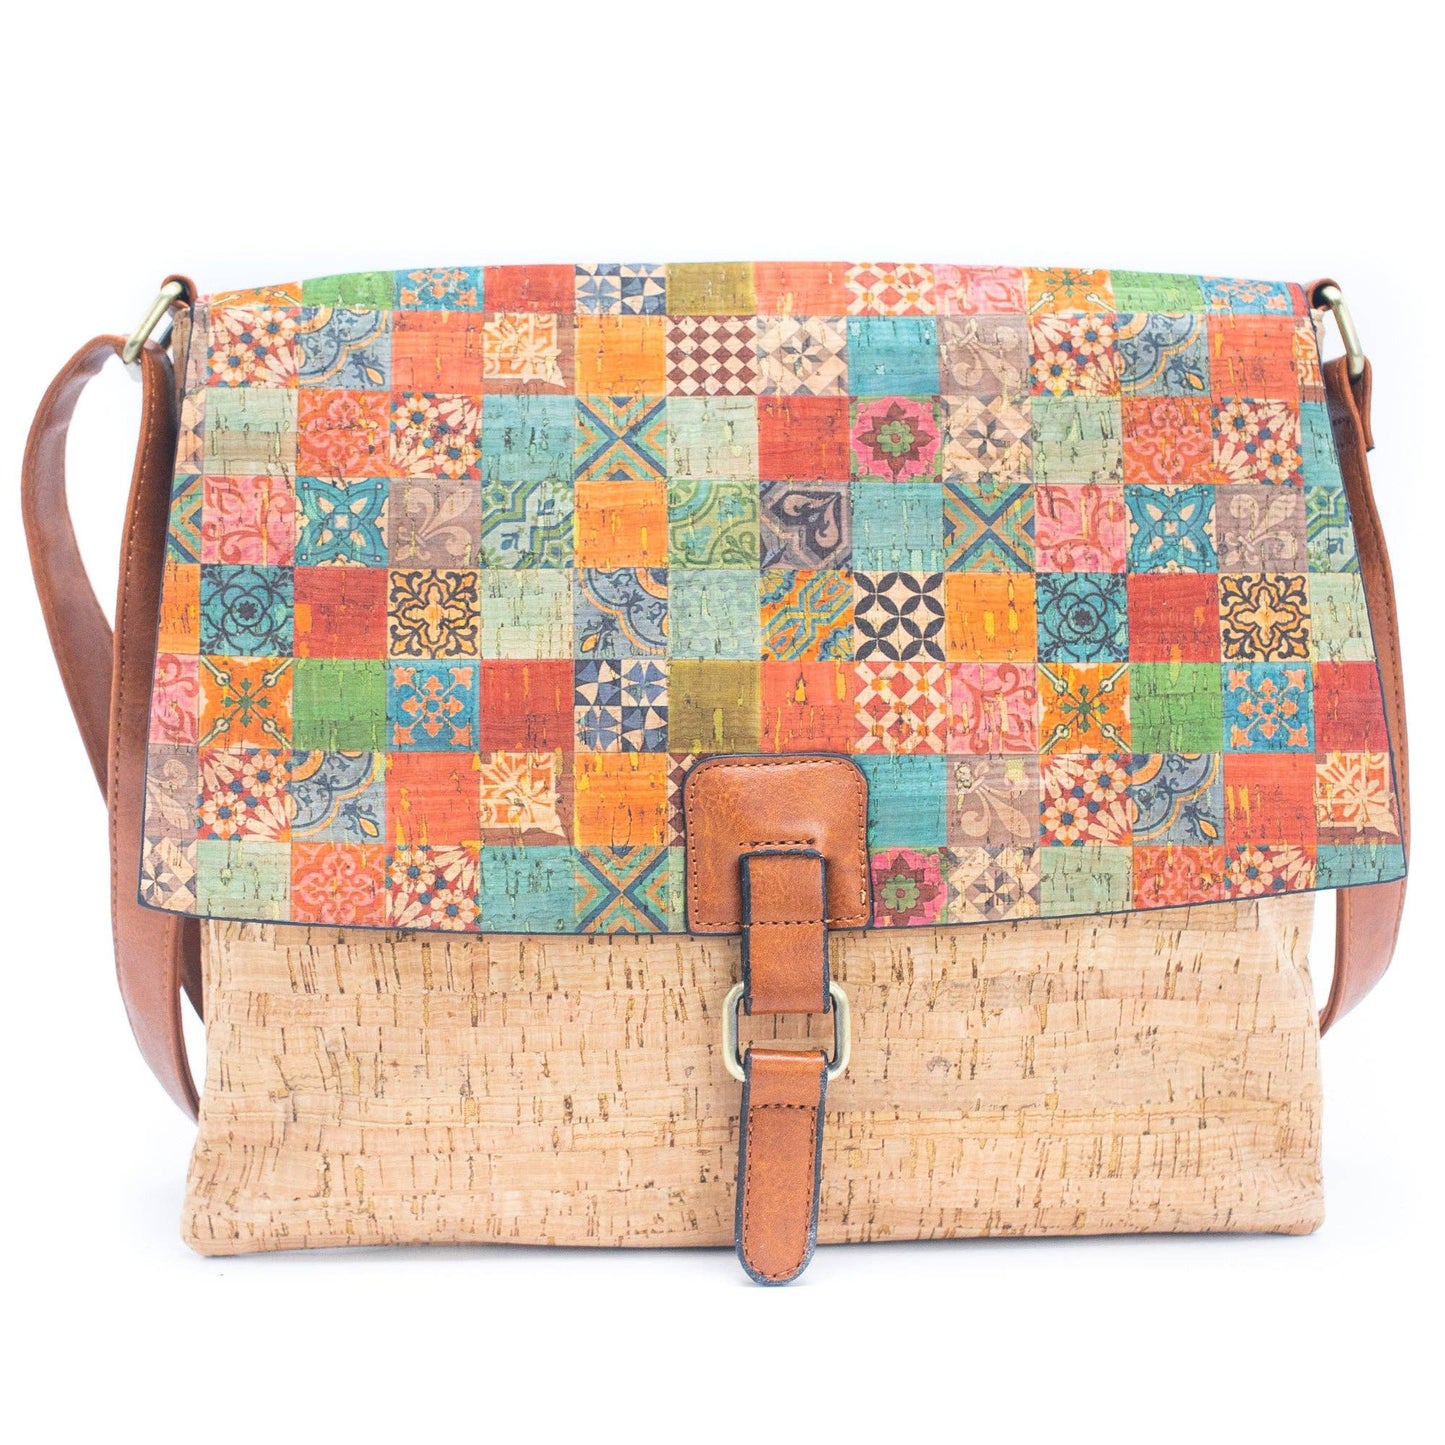 Cork Crossbody Bag with Mosaic and Floral Prints BAGD-464-9